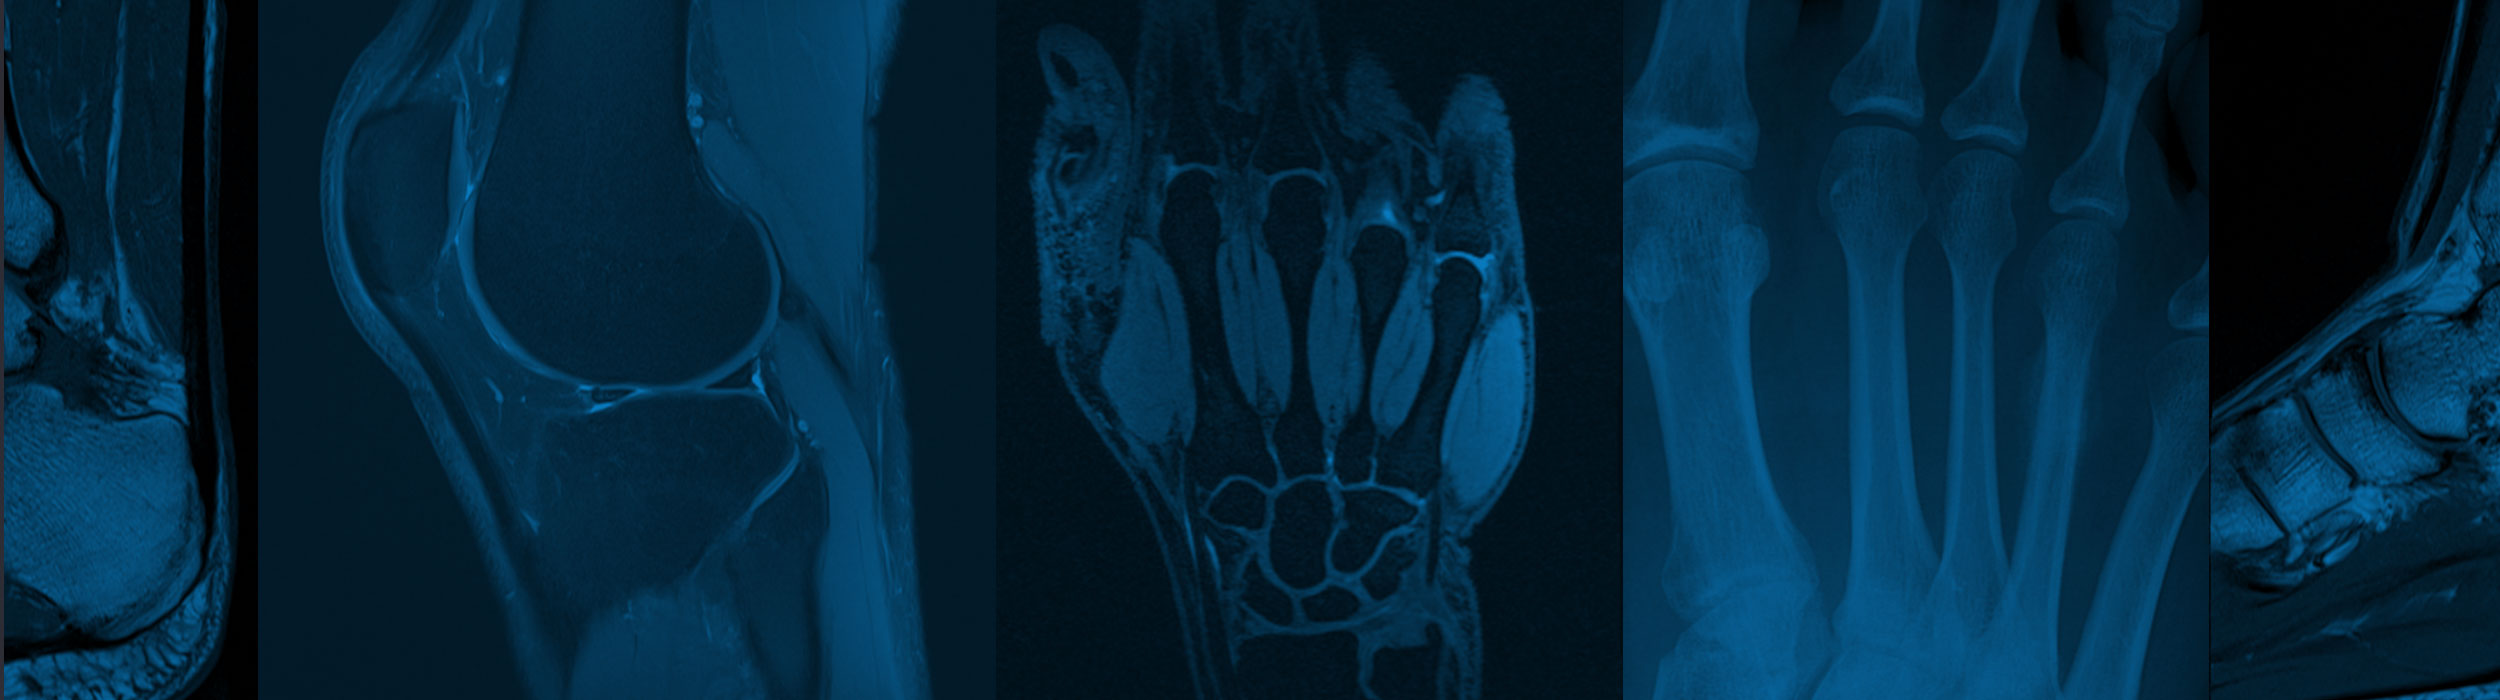 Leeds MSK Radiologists Banner showing X-Rays